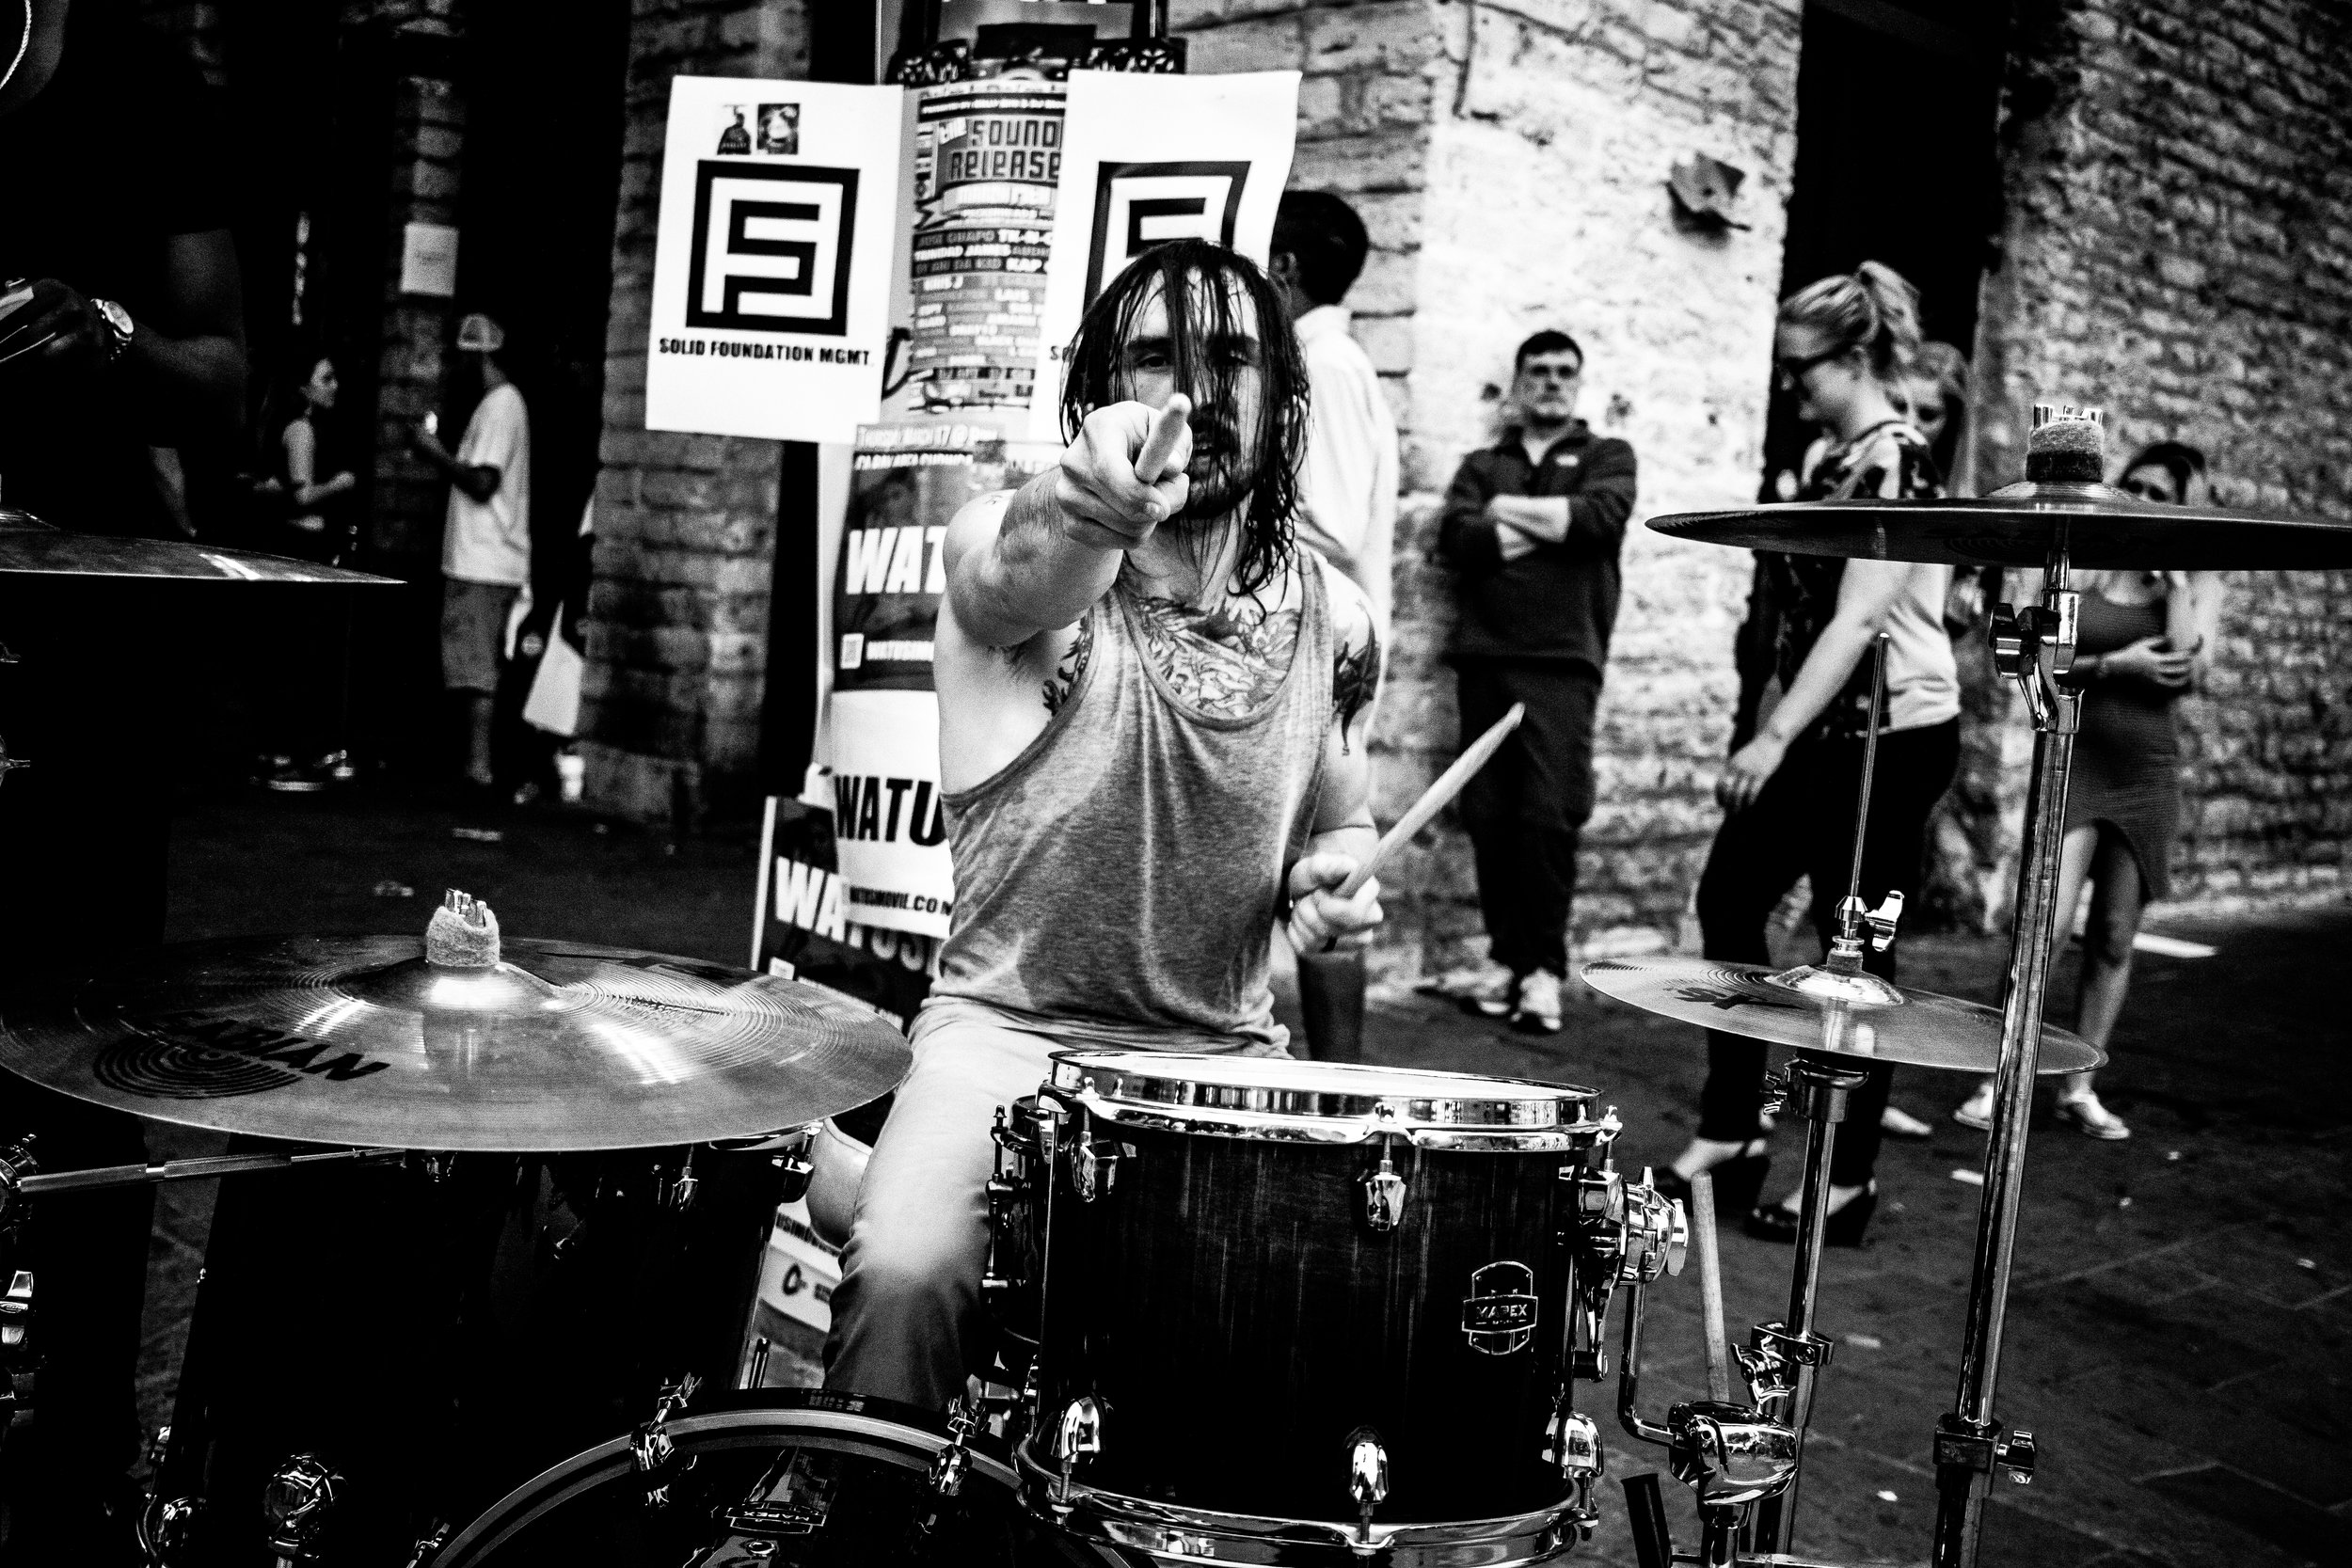  The streets of SXSW are insane and packed with people 24/7. I had some time to walk around and shot this photo of a street drummer. I love this shot but it never got shared.&nbsp; 